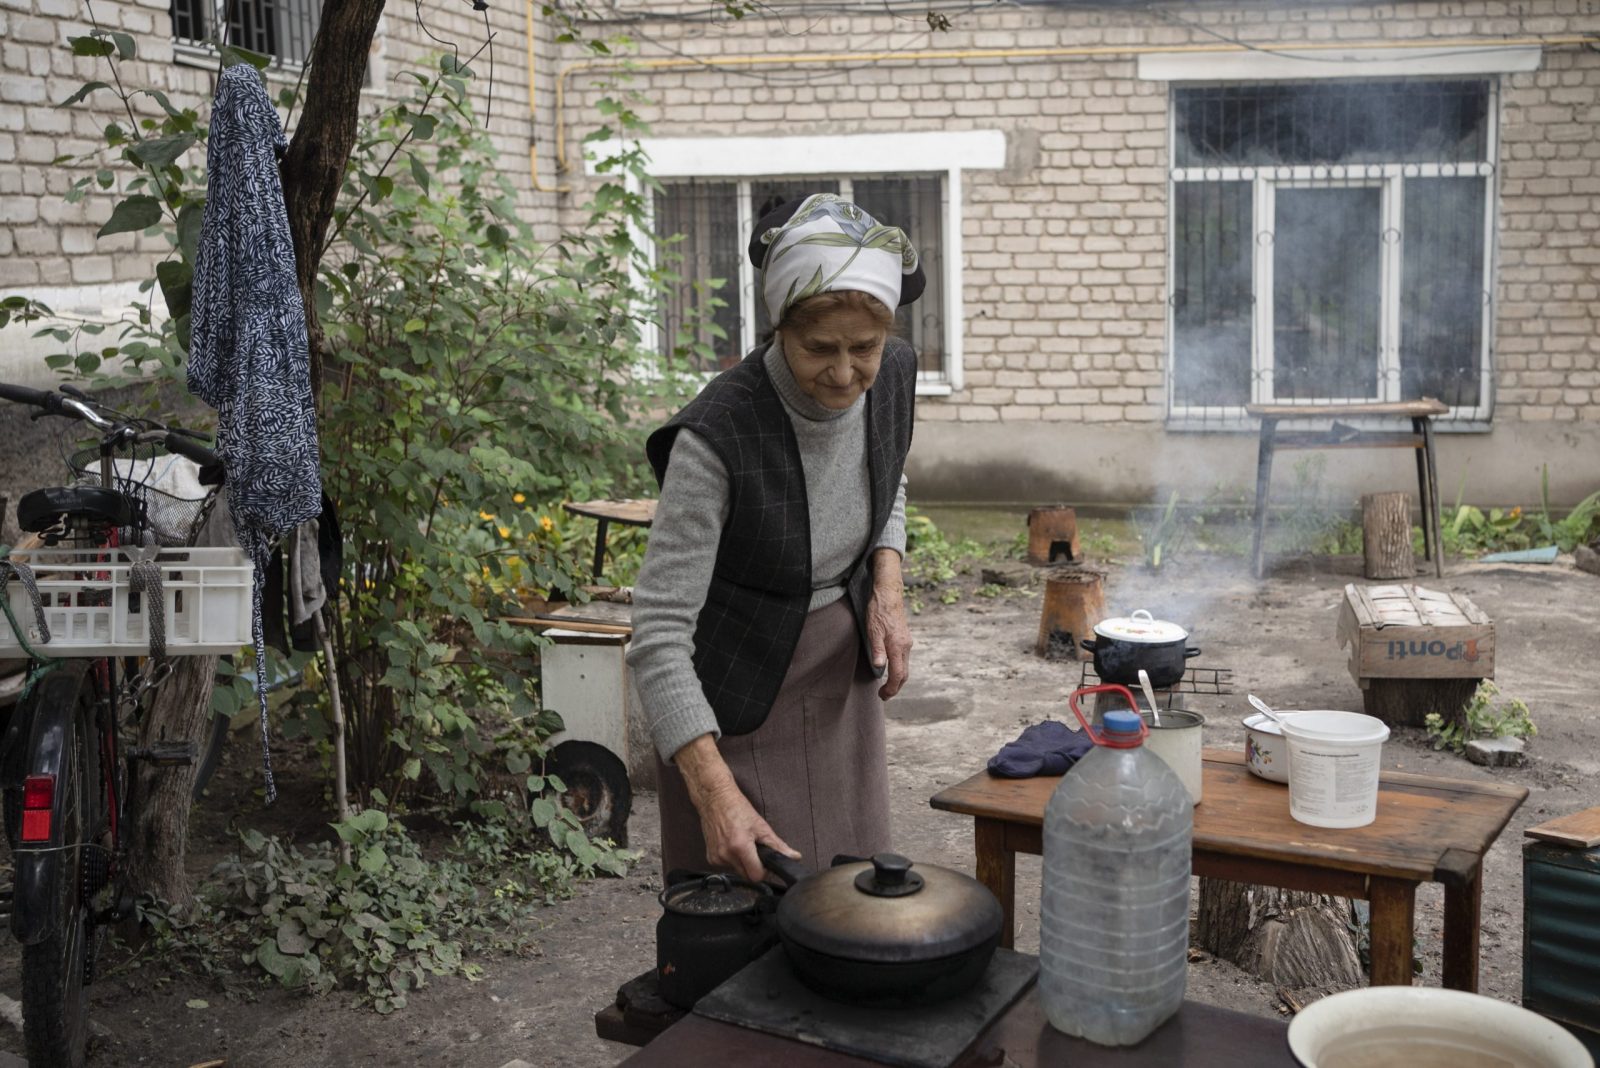 epa10188671 Maria, 82, cooks food over an open fire as gas and electricity are not available, near a residential building in the recently recaptured city of Izyum, Kharkiv region, northeastern Ukraine, 16 September 2022, amid Russia's invasion. The Ukrainian army pushed Russian troops from occupied territory in the northeast of the country in a counterattack. Kharkiv and surrounding areas have been the target of heavy shelling since February 2022, when Russian troops entered Ukraine starting a conflict that has provoked destruction and a humanitarian crisis.  EPA/ANASTASIA VLASOVA